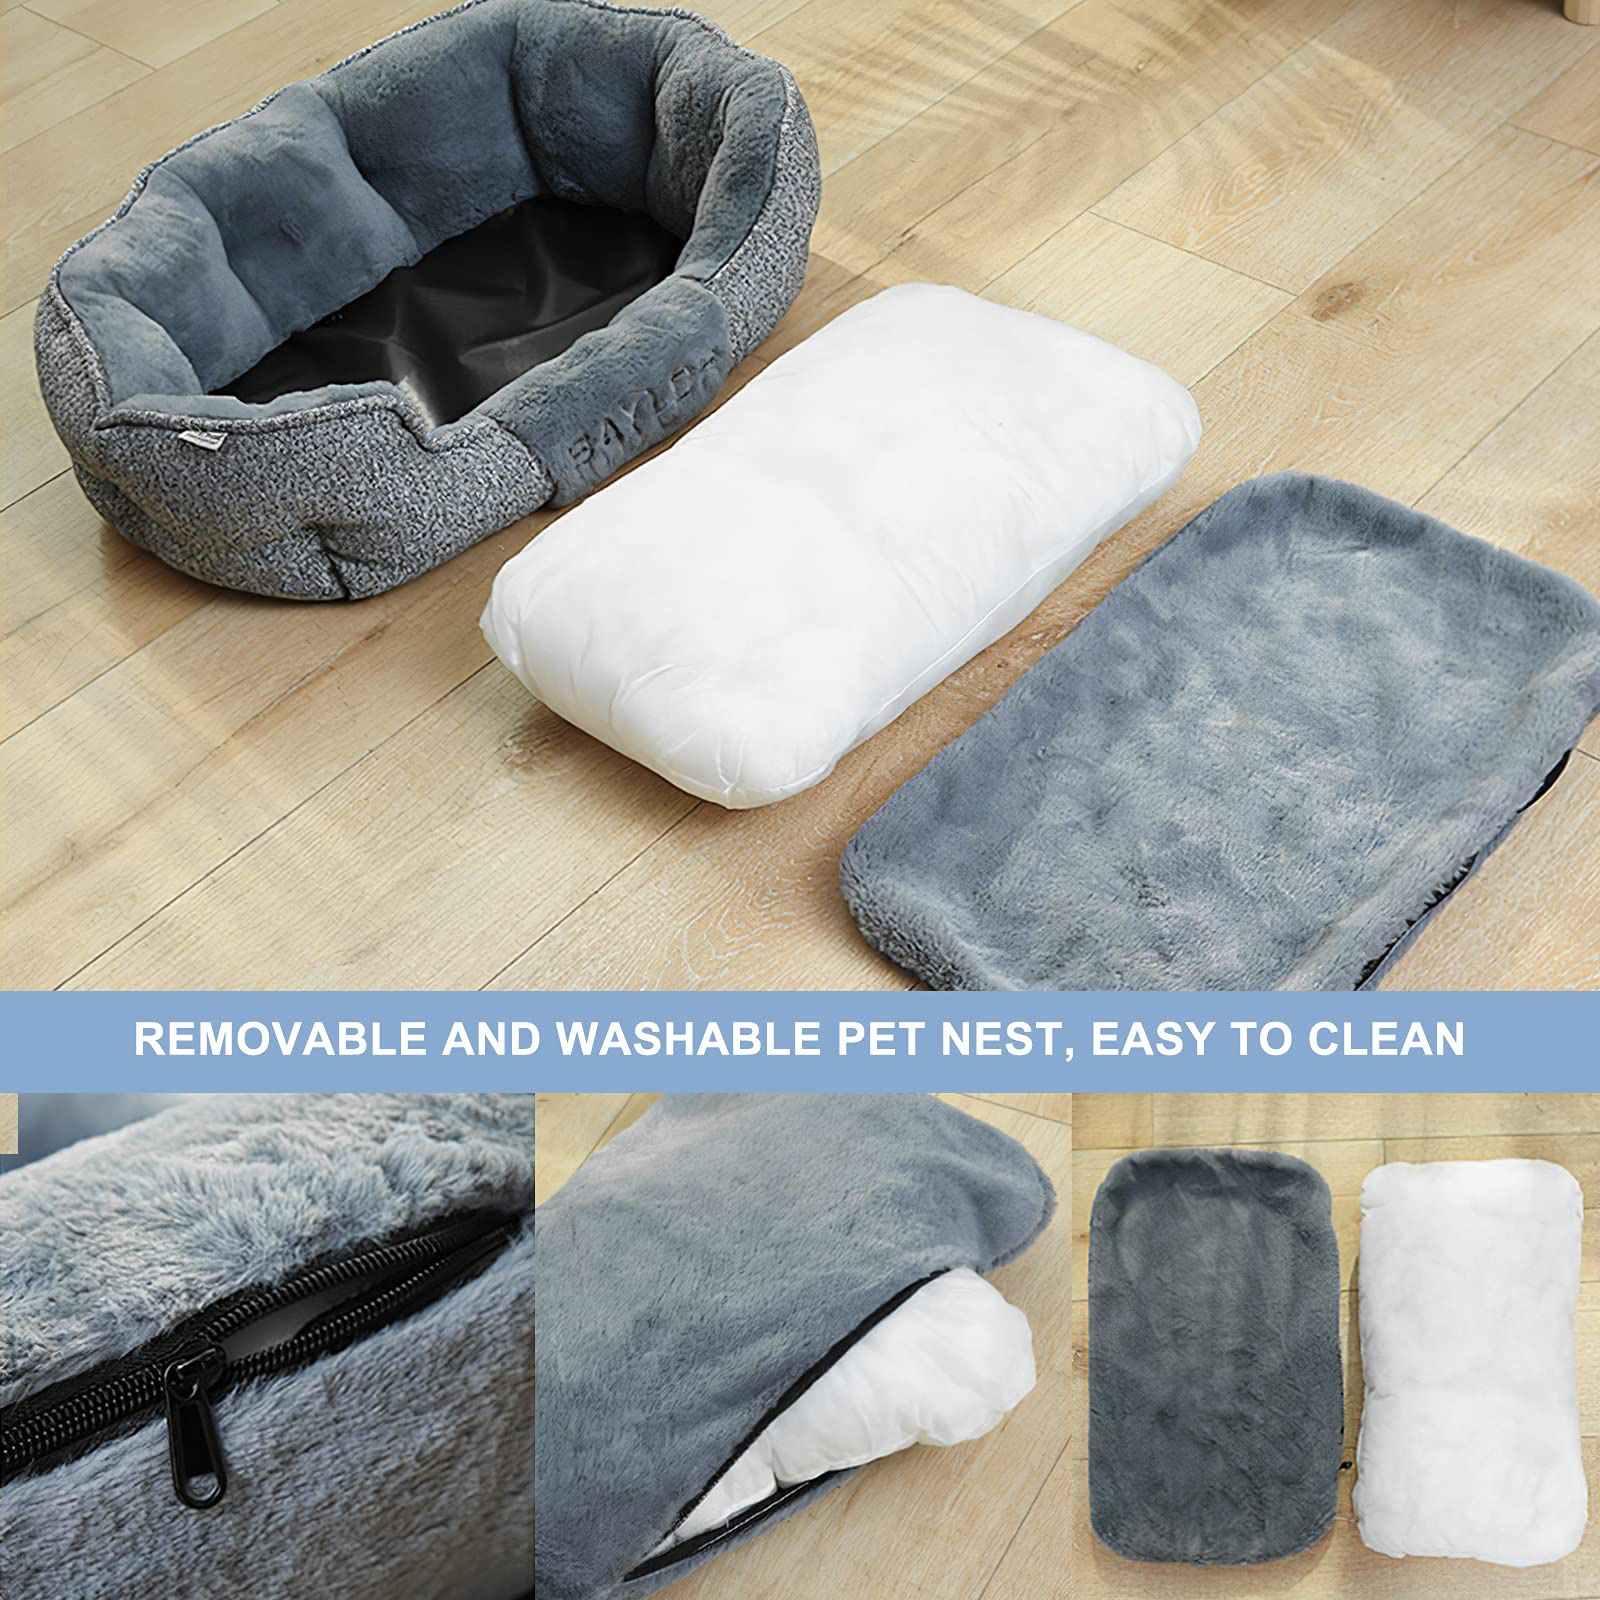 SeaTop Calming Pet Beds for Small Medium Large Sizes Dogs NAD Cats, Comfy Self Warming Pet Beds with Removable Washable Covers  Details:  Size: Large 